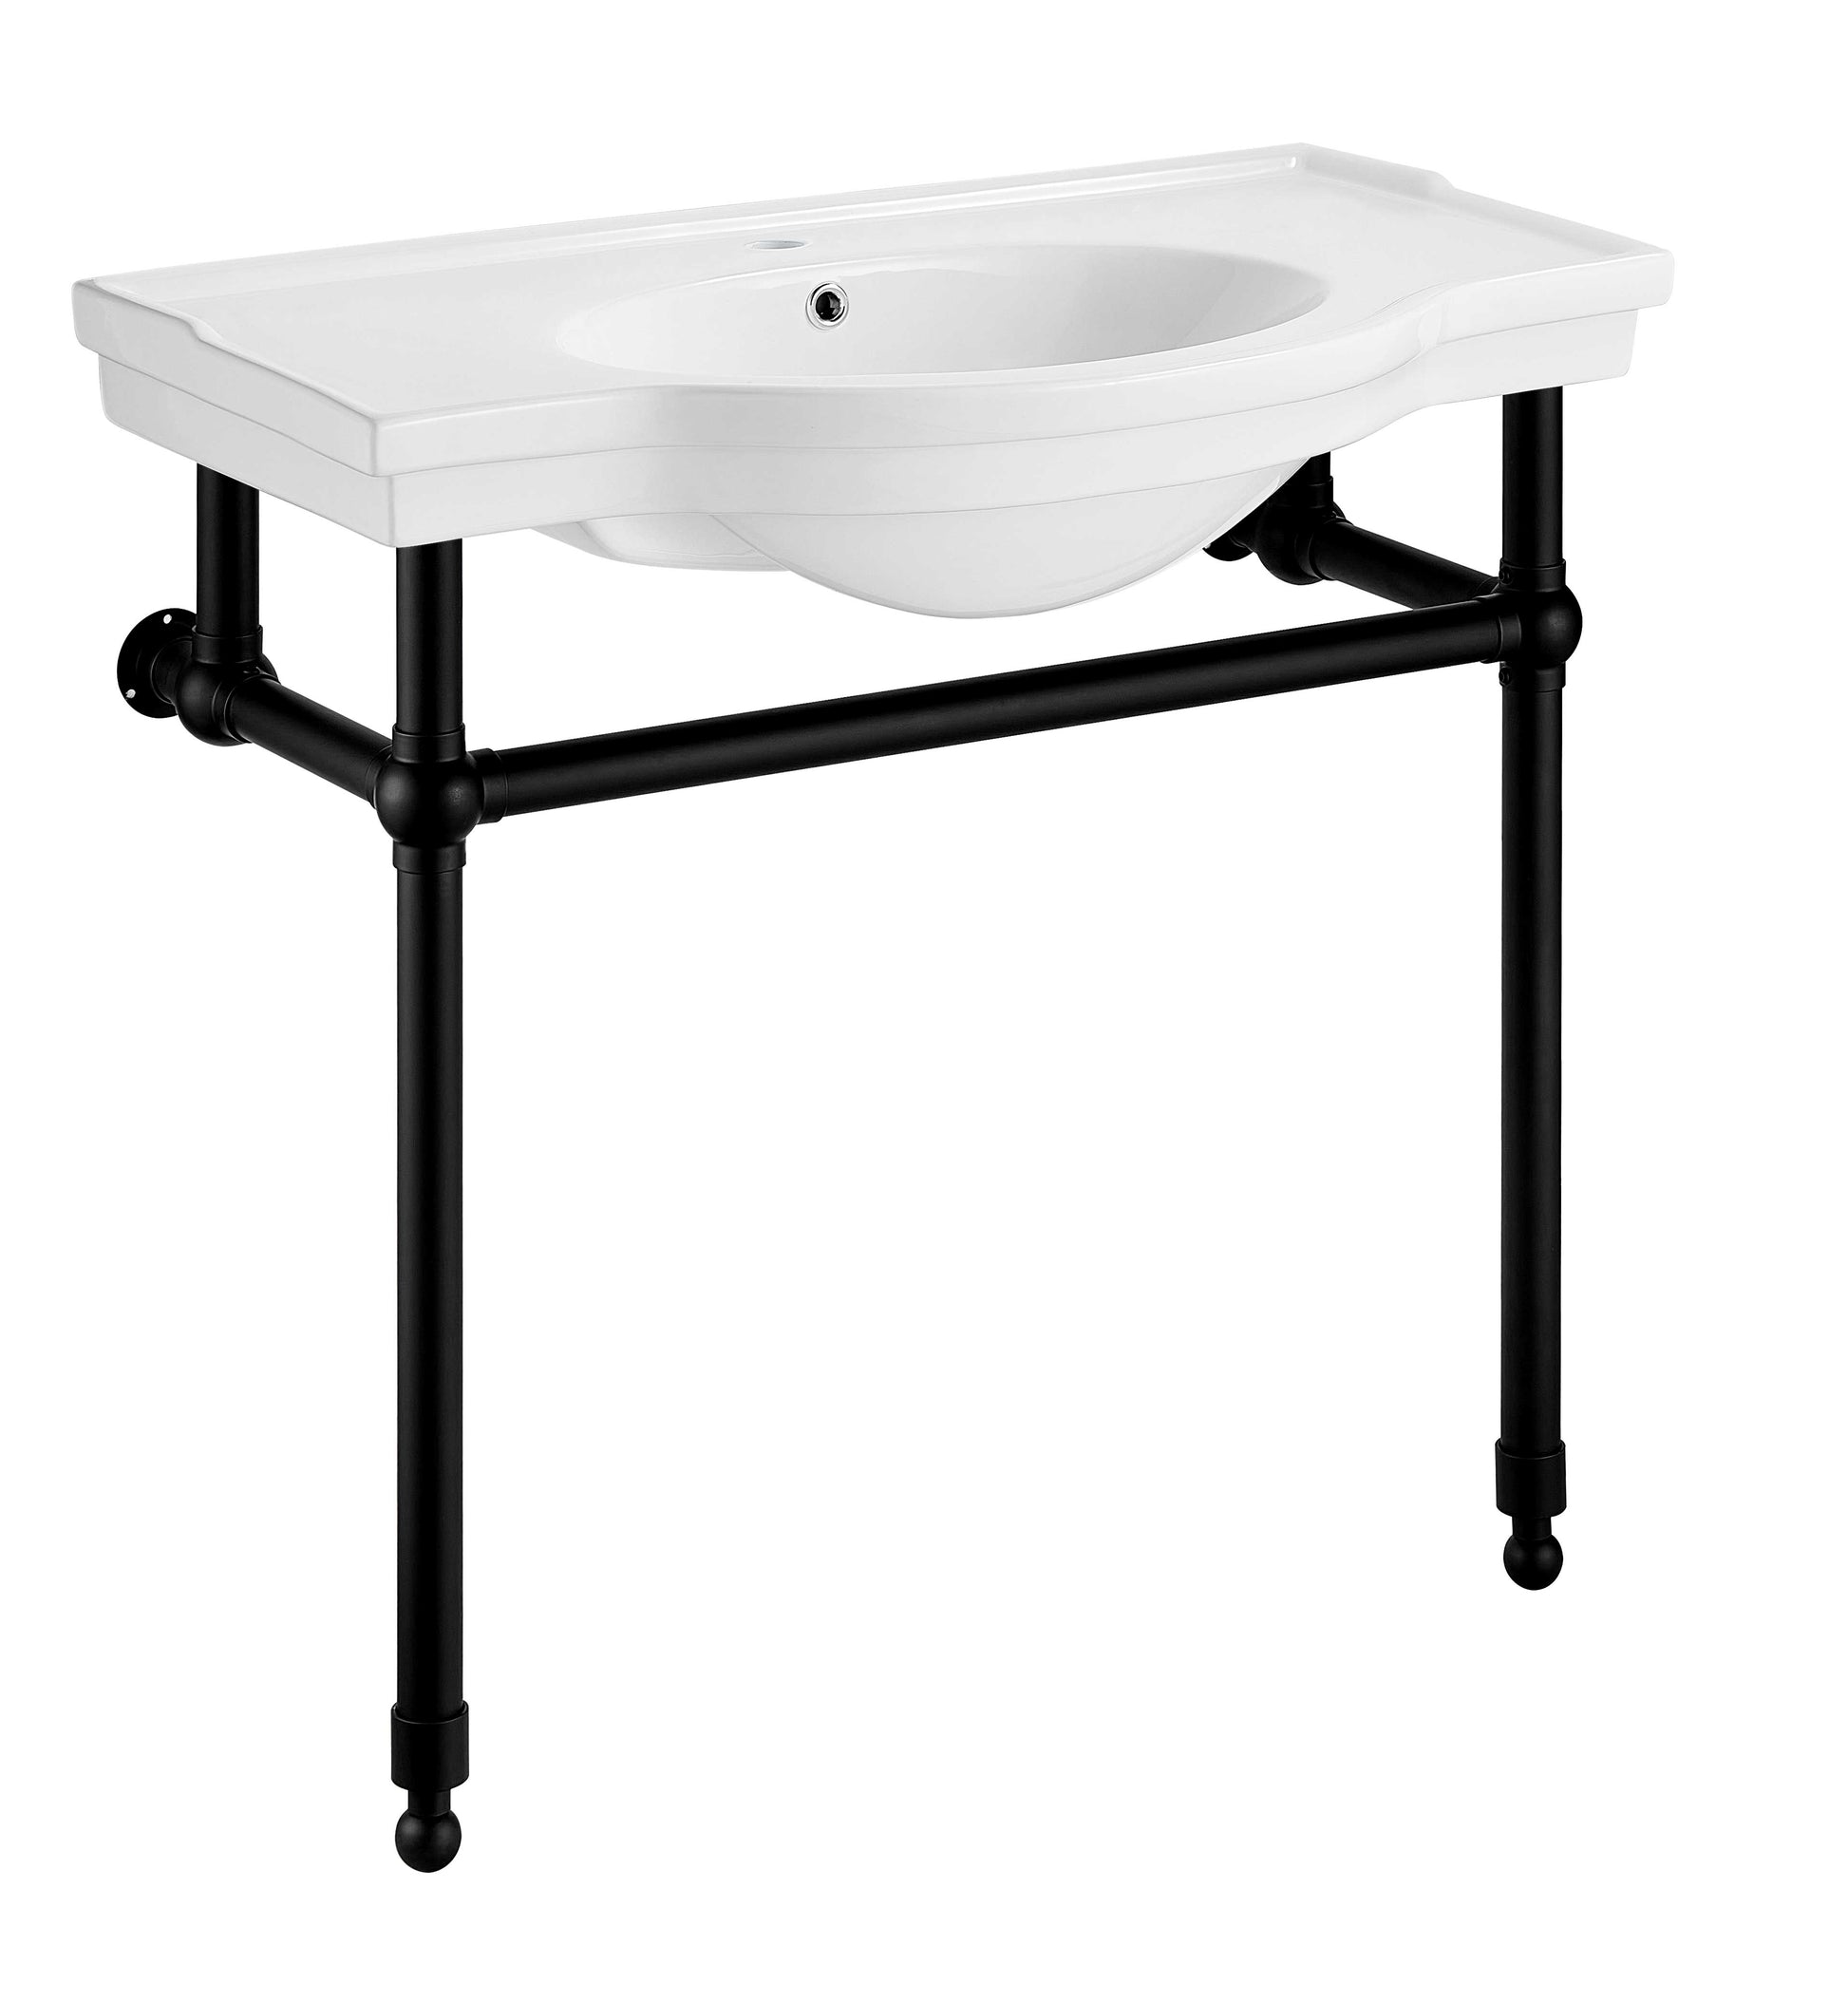 CS-FGC003-MB - Viola 34.5 in. Console Sink in Matte Black with Ceramic Counter Top